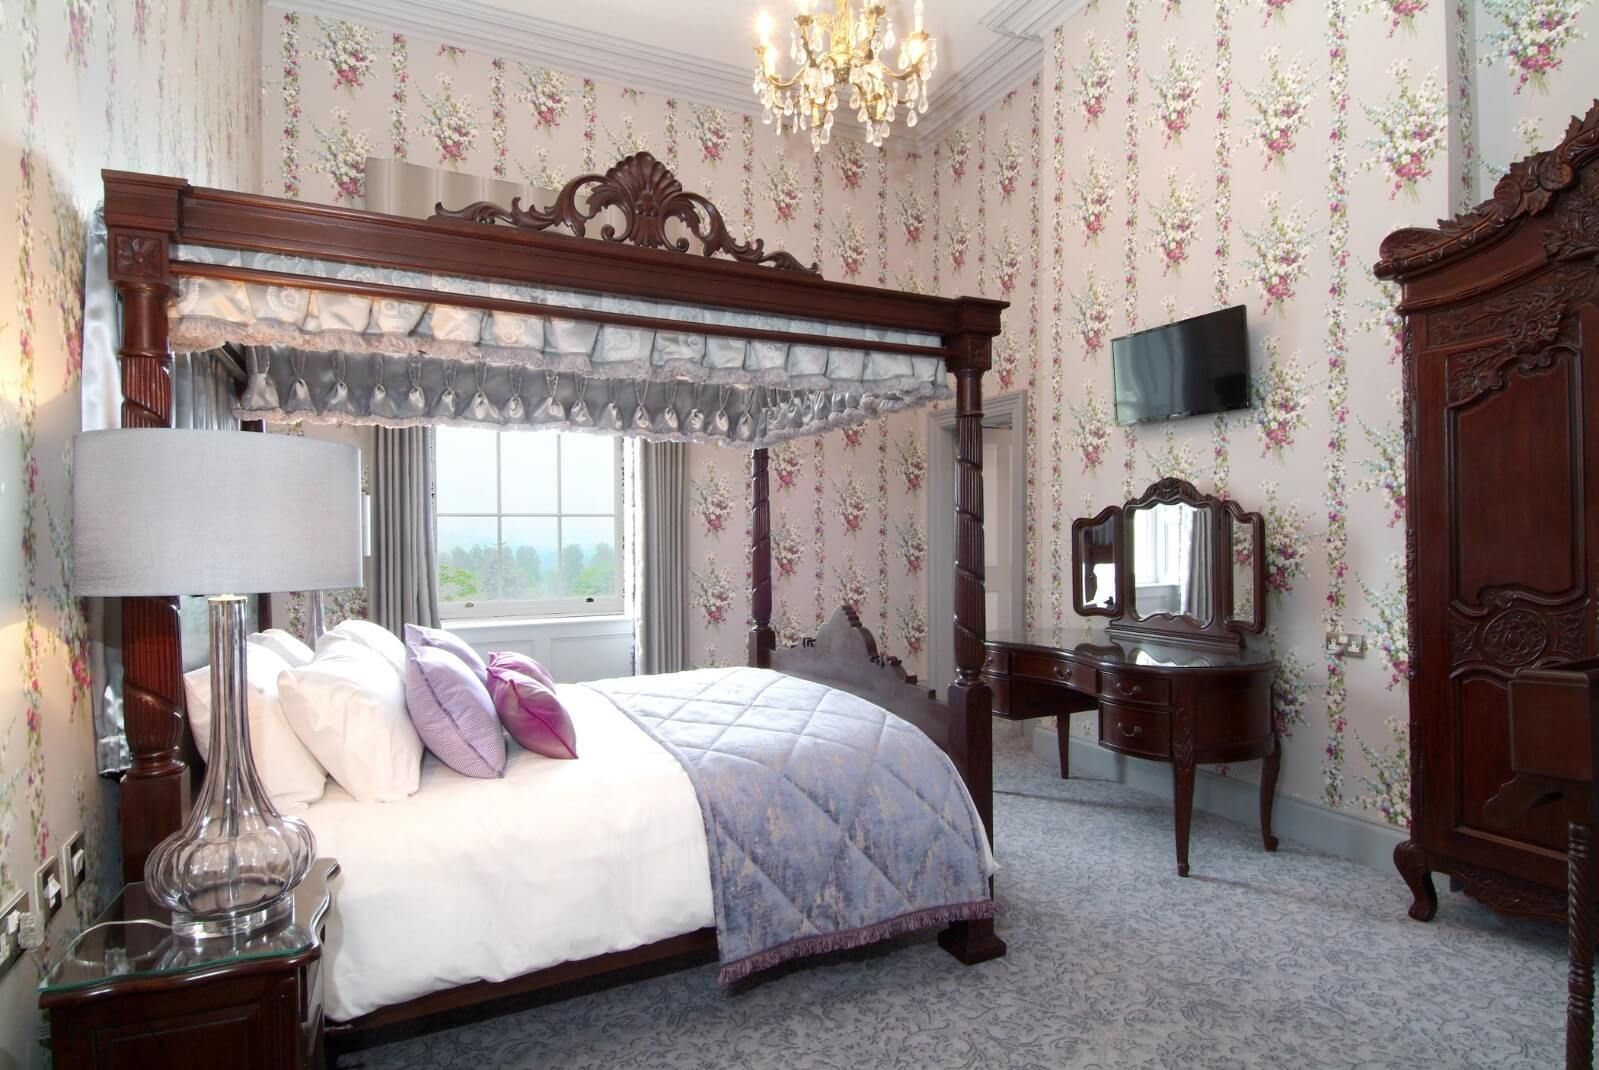 Junior Suite at Rockhill House